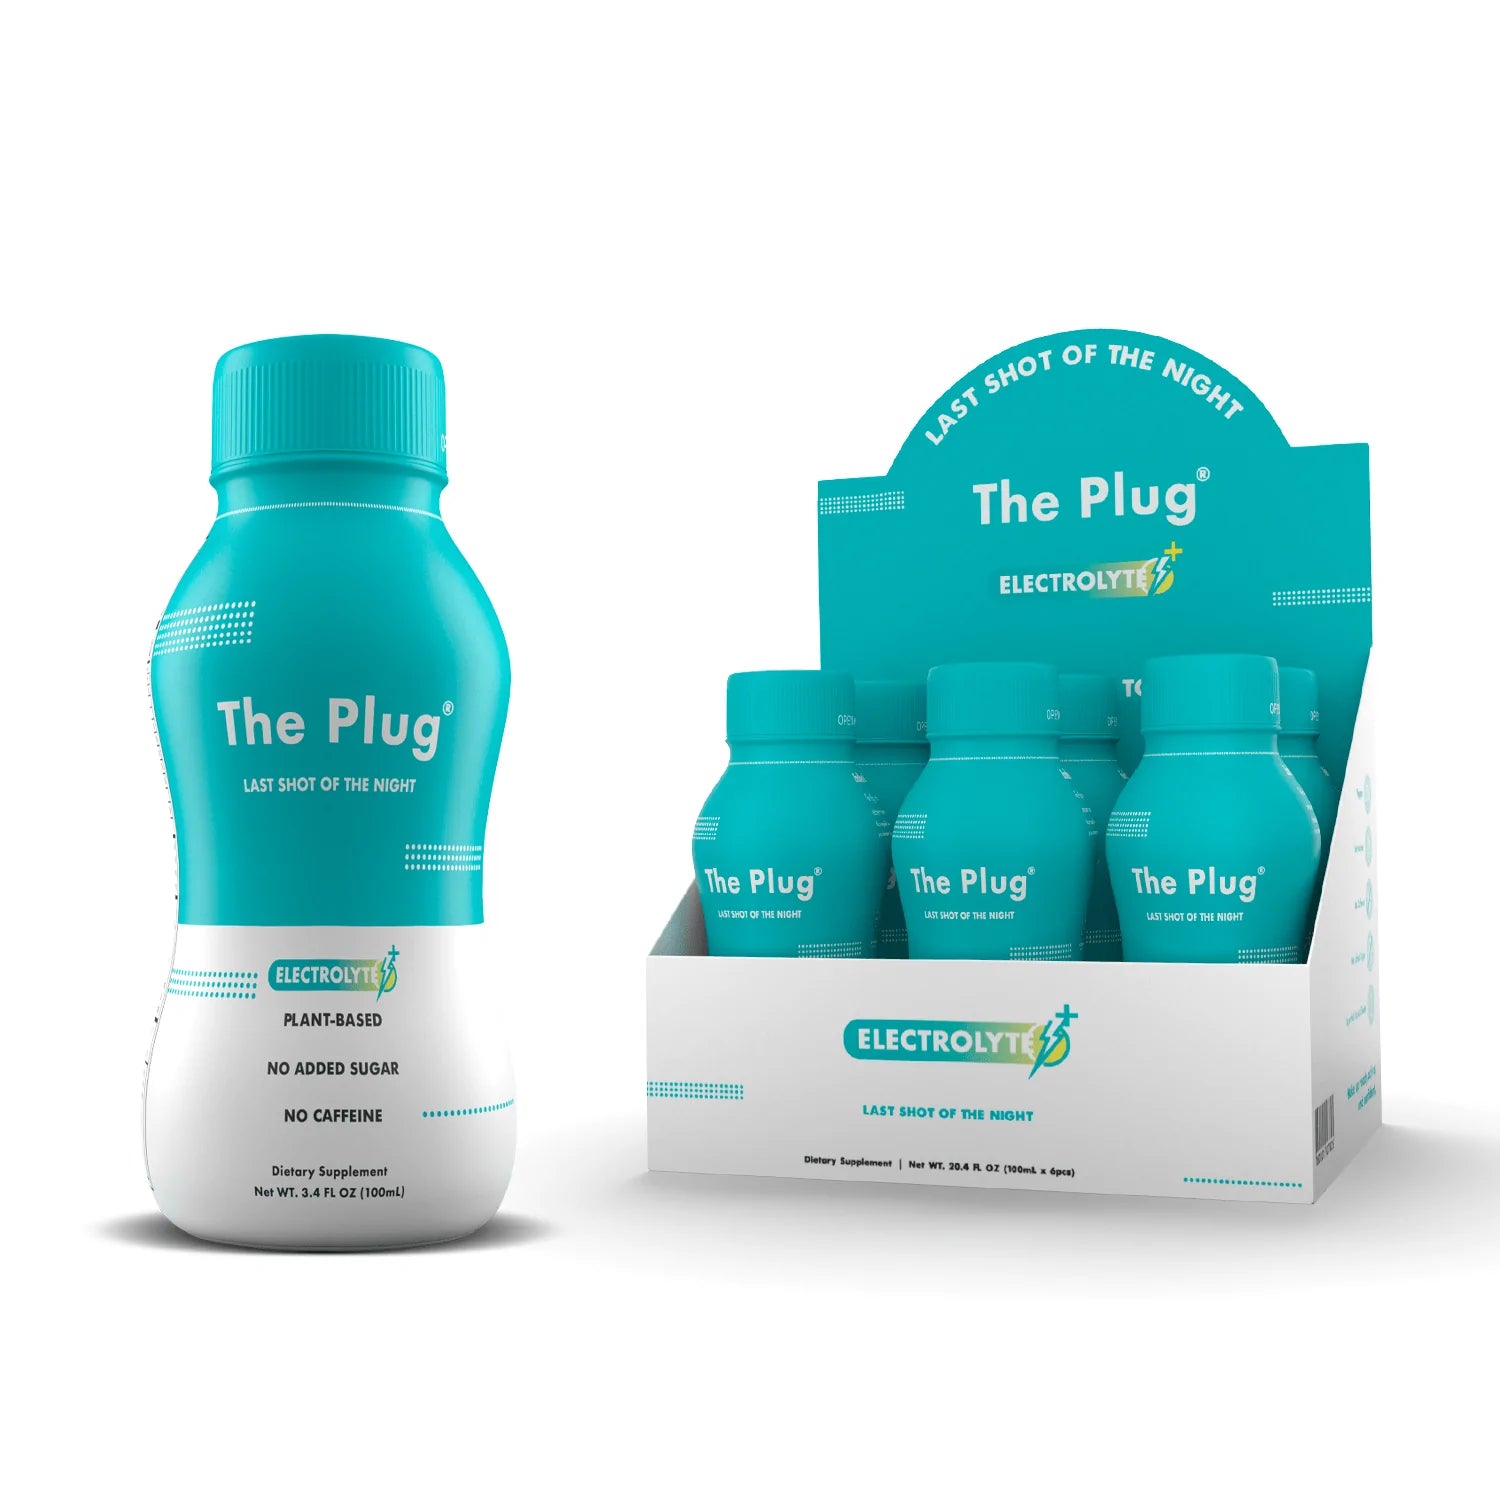  The Plug Drink Plant-based by The Plug Drink The Plug Drink Perfumarie